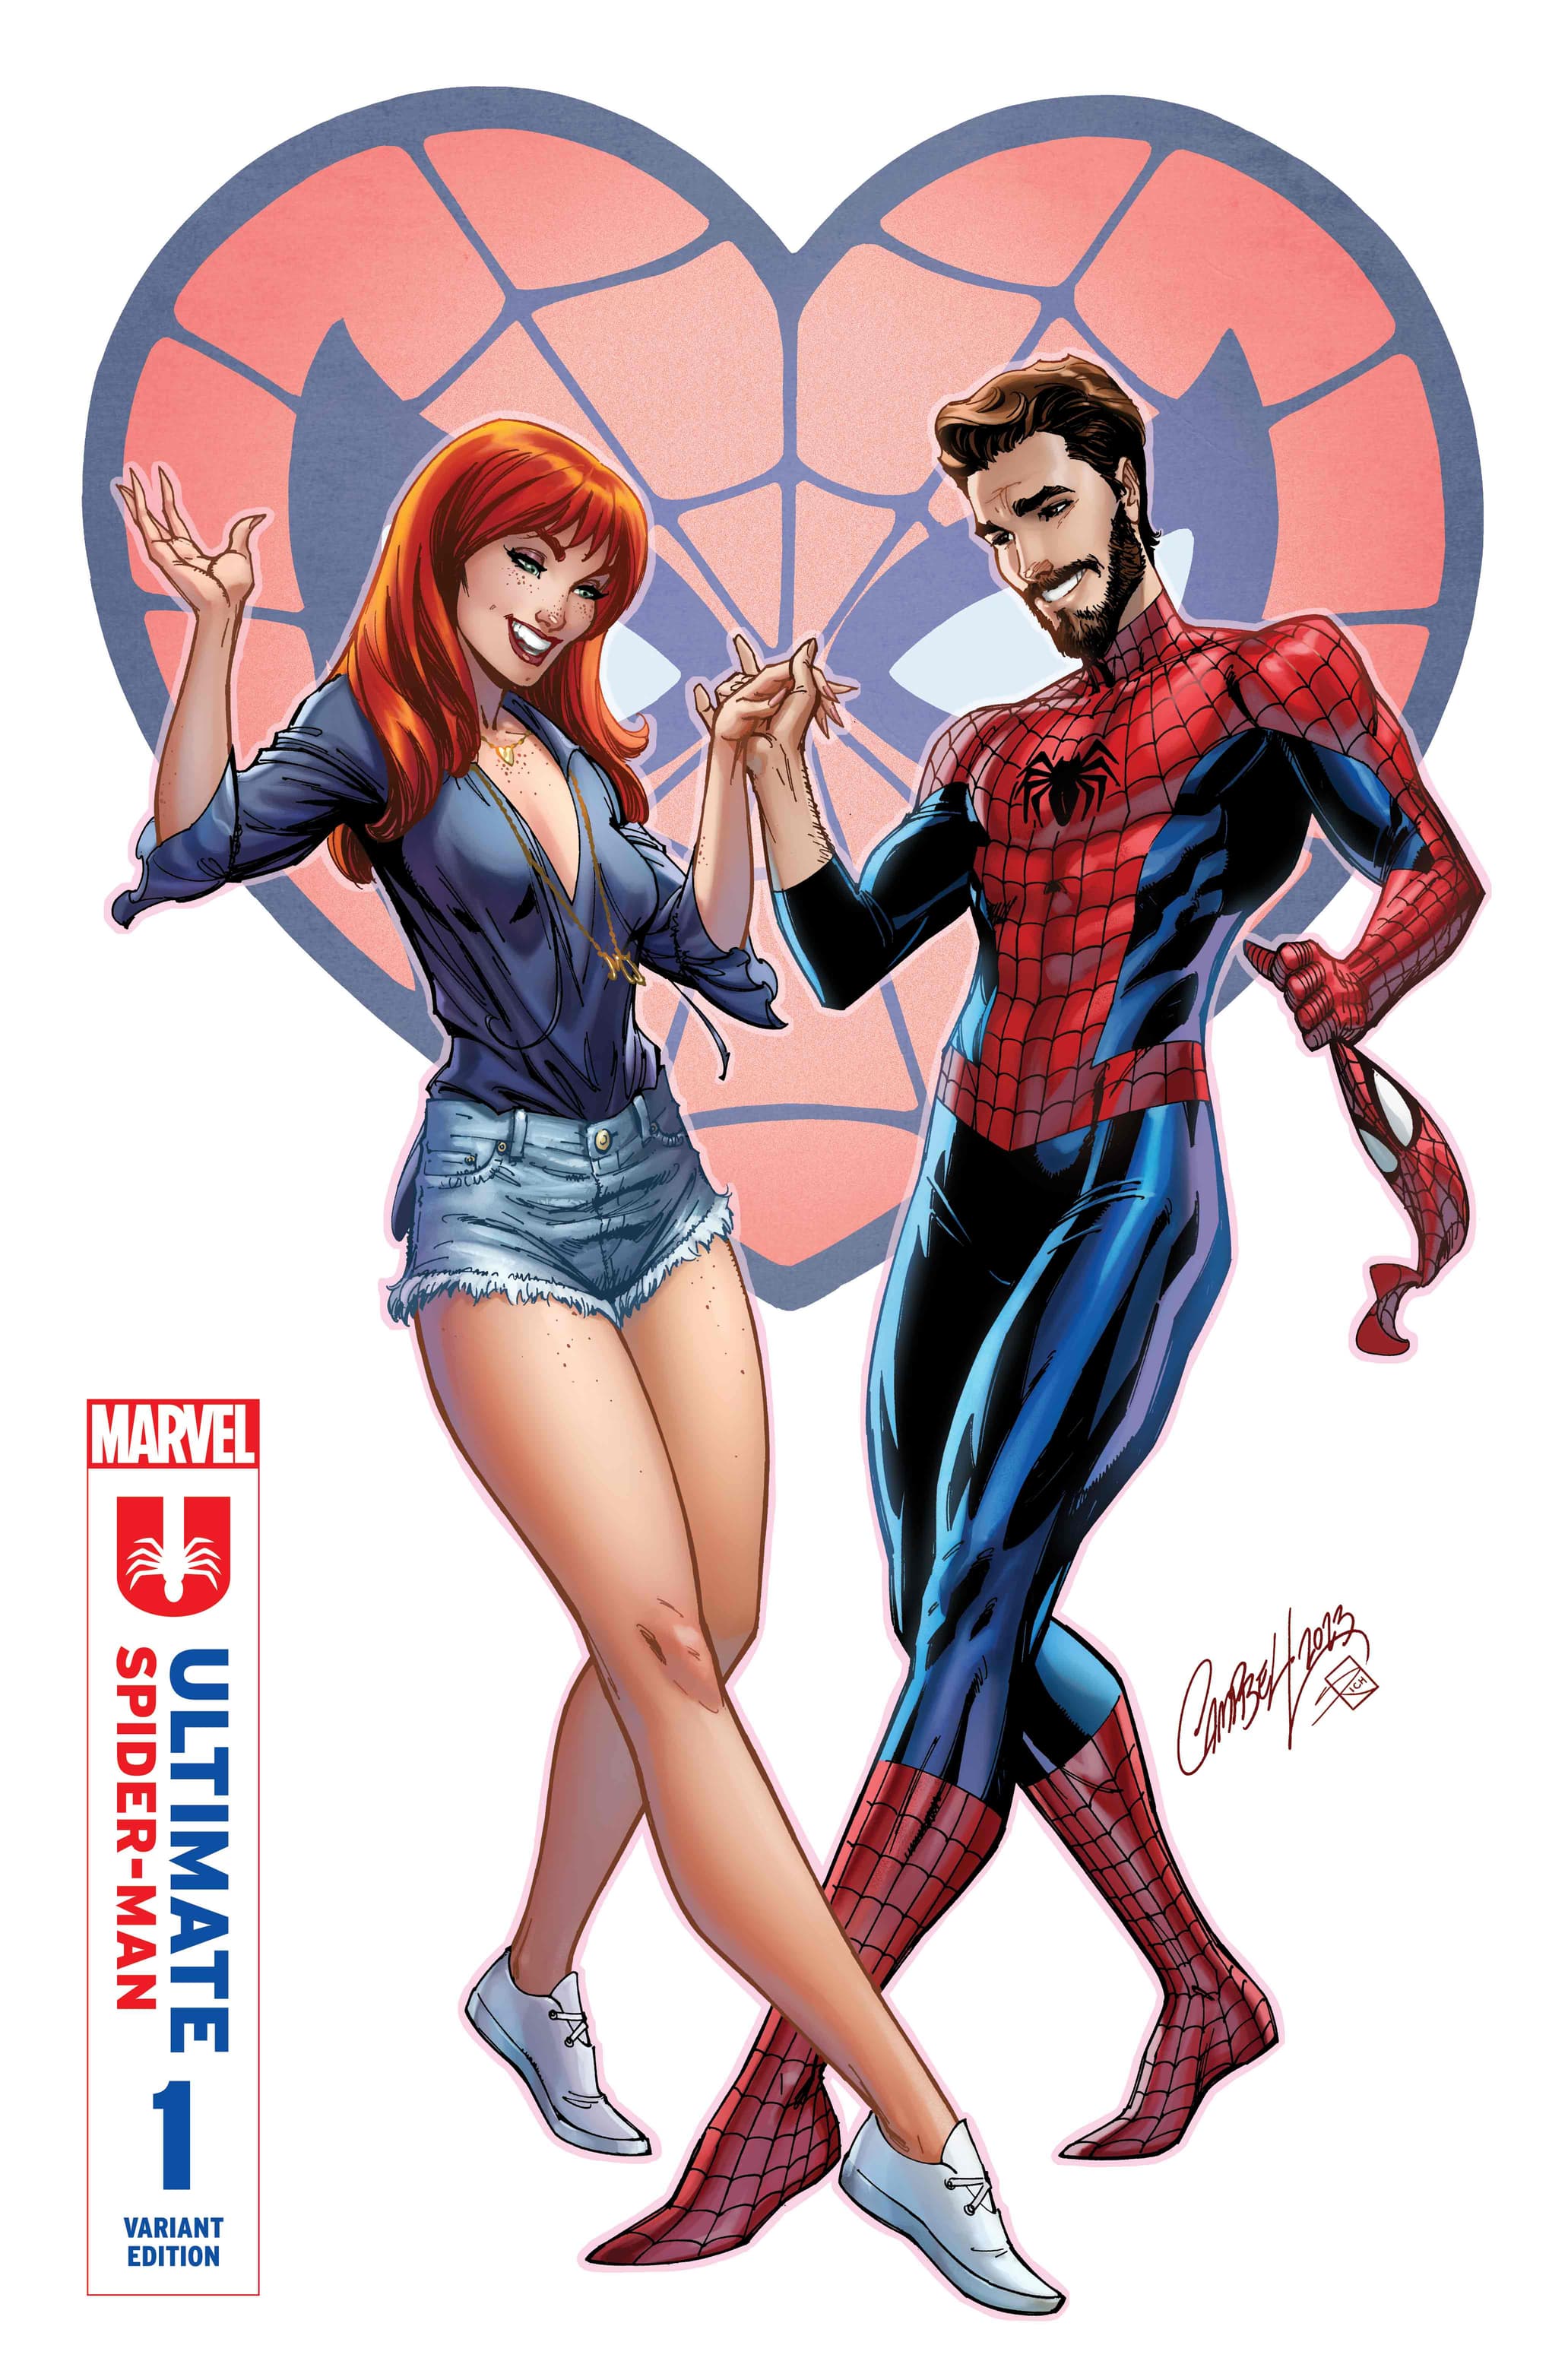 J. Scott Campbell's 'Ultimate Spider-Man #1' Cover Spotlights Peter Parker  and Mary Jane's Ultimate Love Story